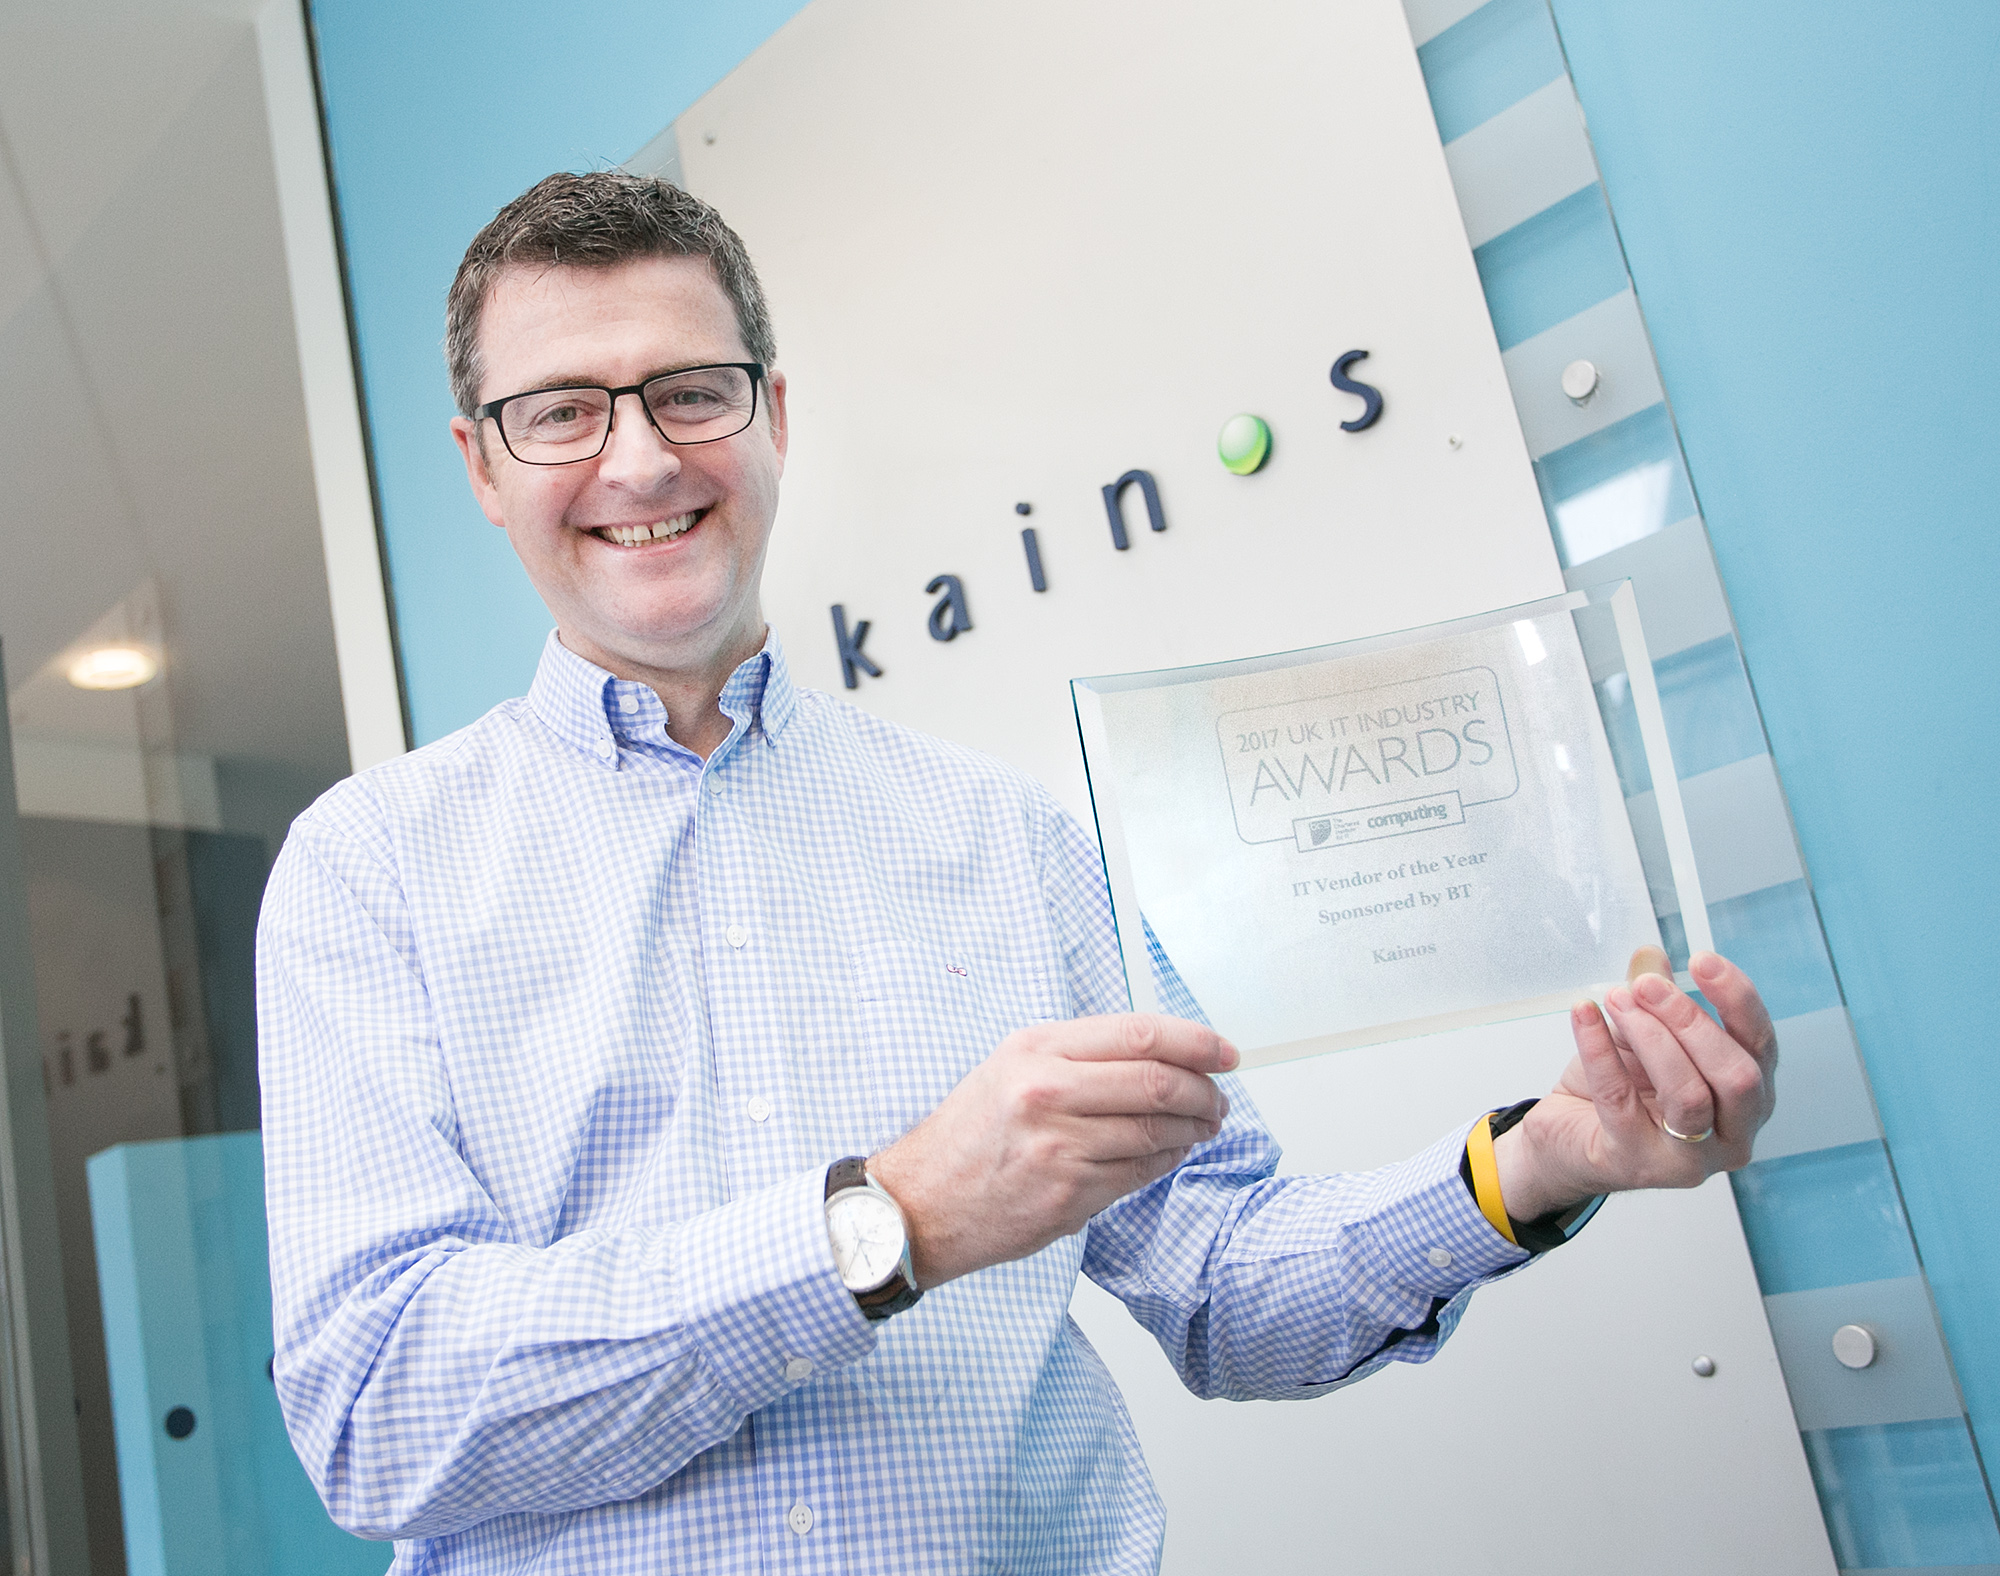 Kainos named UK’s ‘Vendor of the Year’ at top industry awards